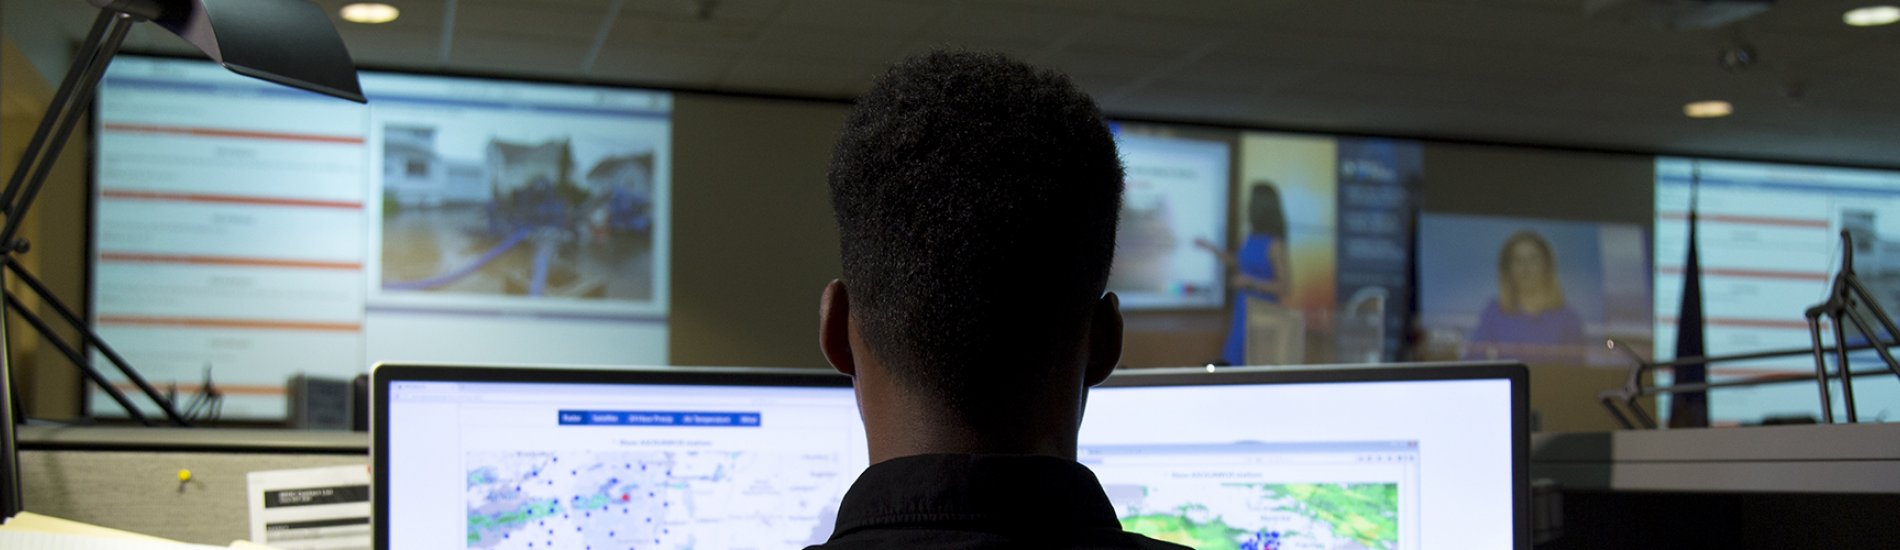 Student working in front of two monitors in an emergency operations center.